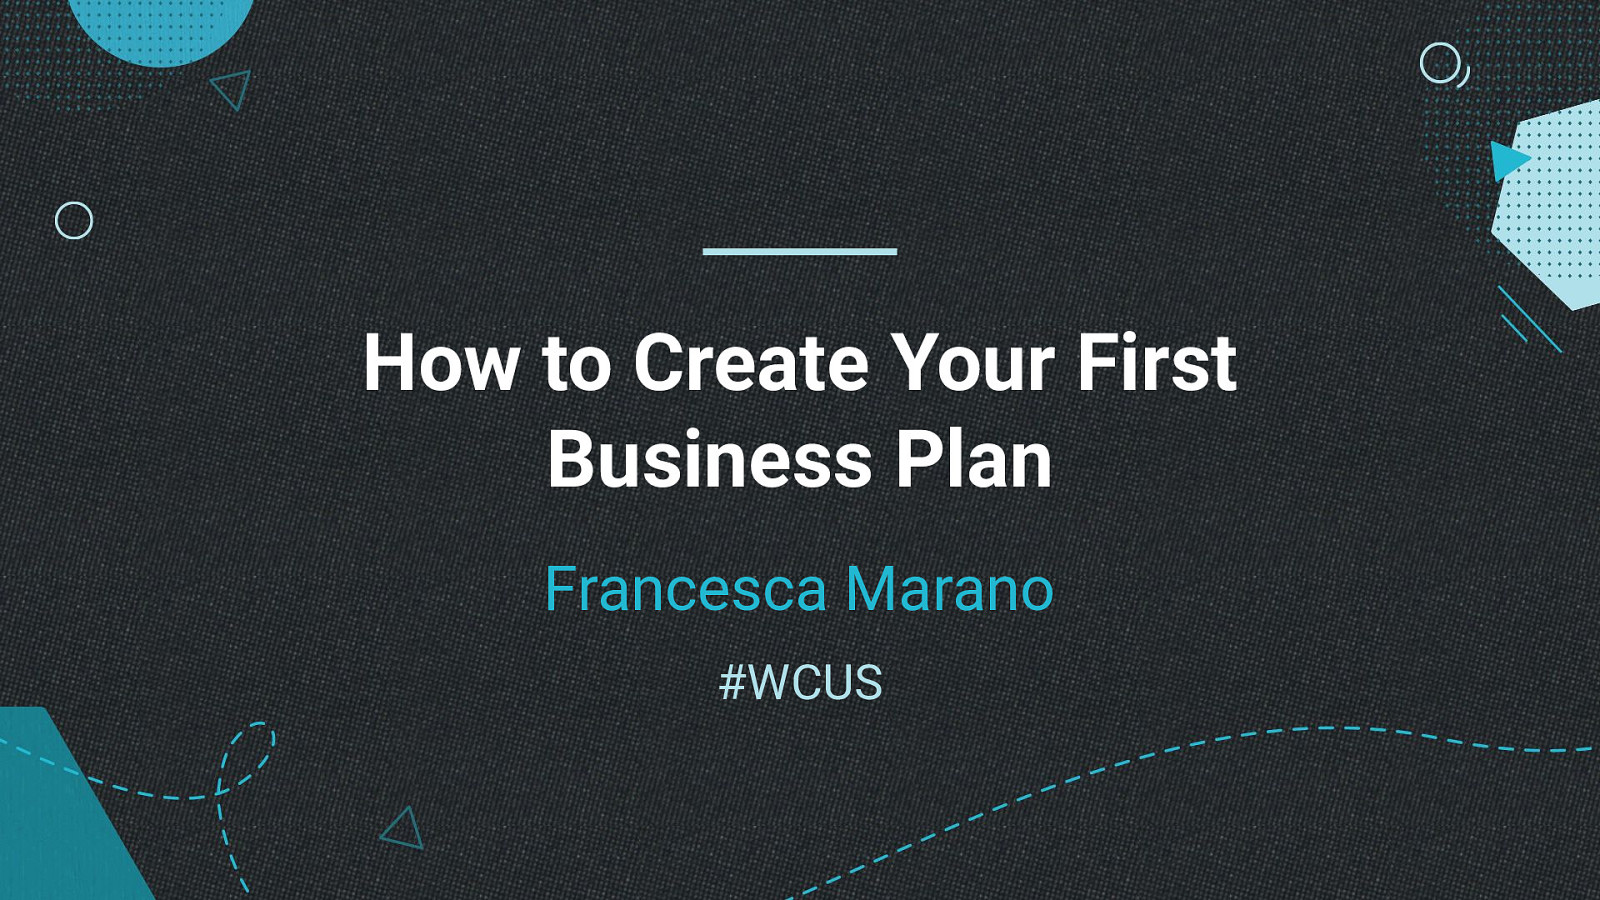 How to Create Your First Business Plan